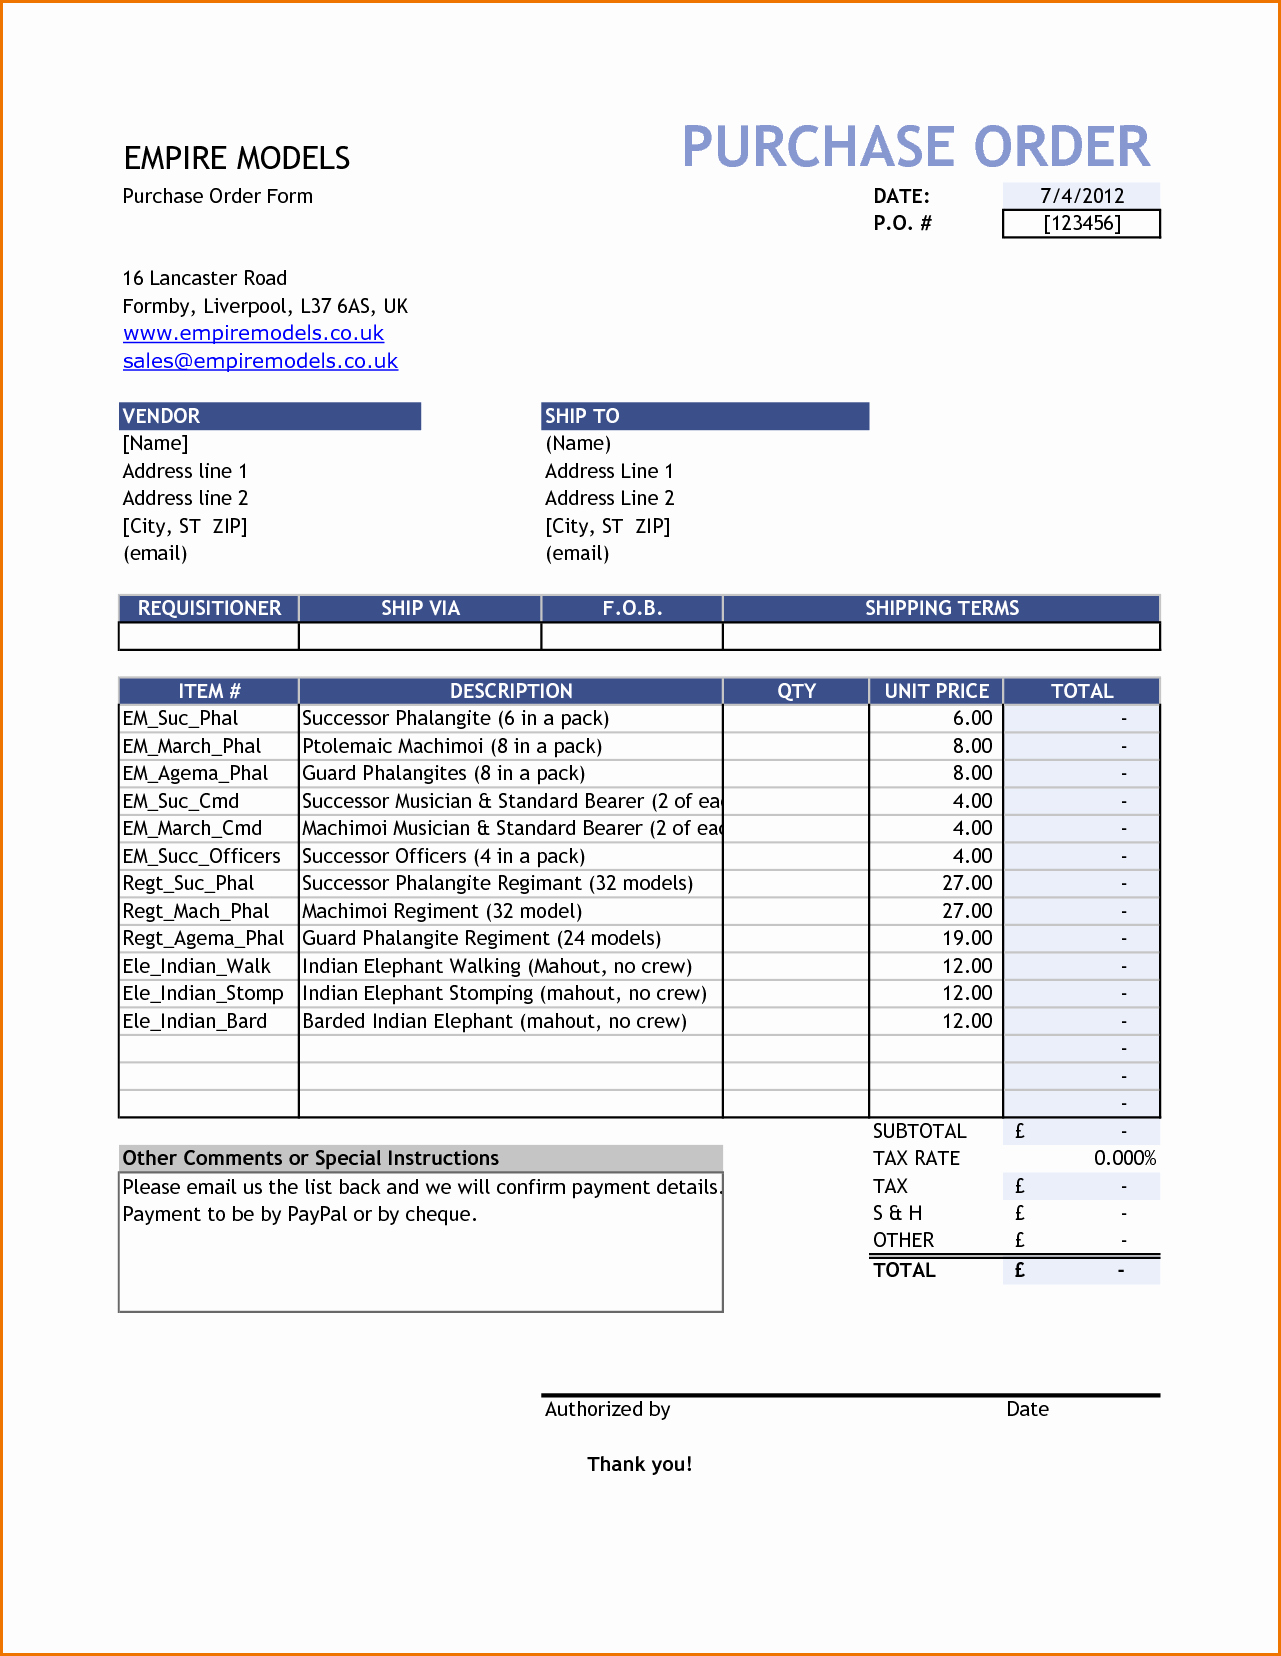 Purchase order Template Microsoft Word Luxury Simple Purchase order form Portablegasgrillweber